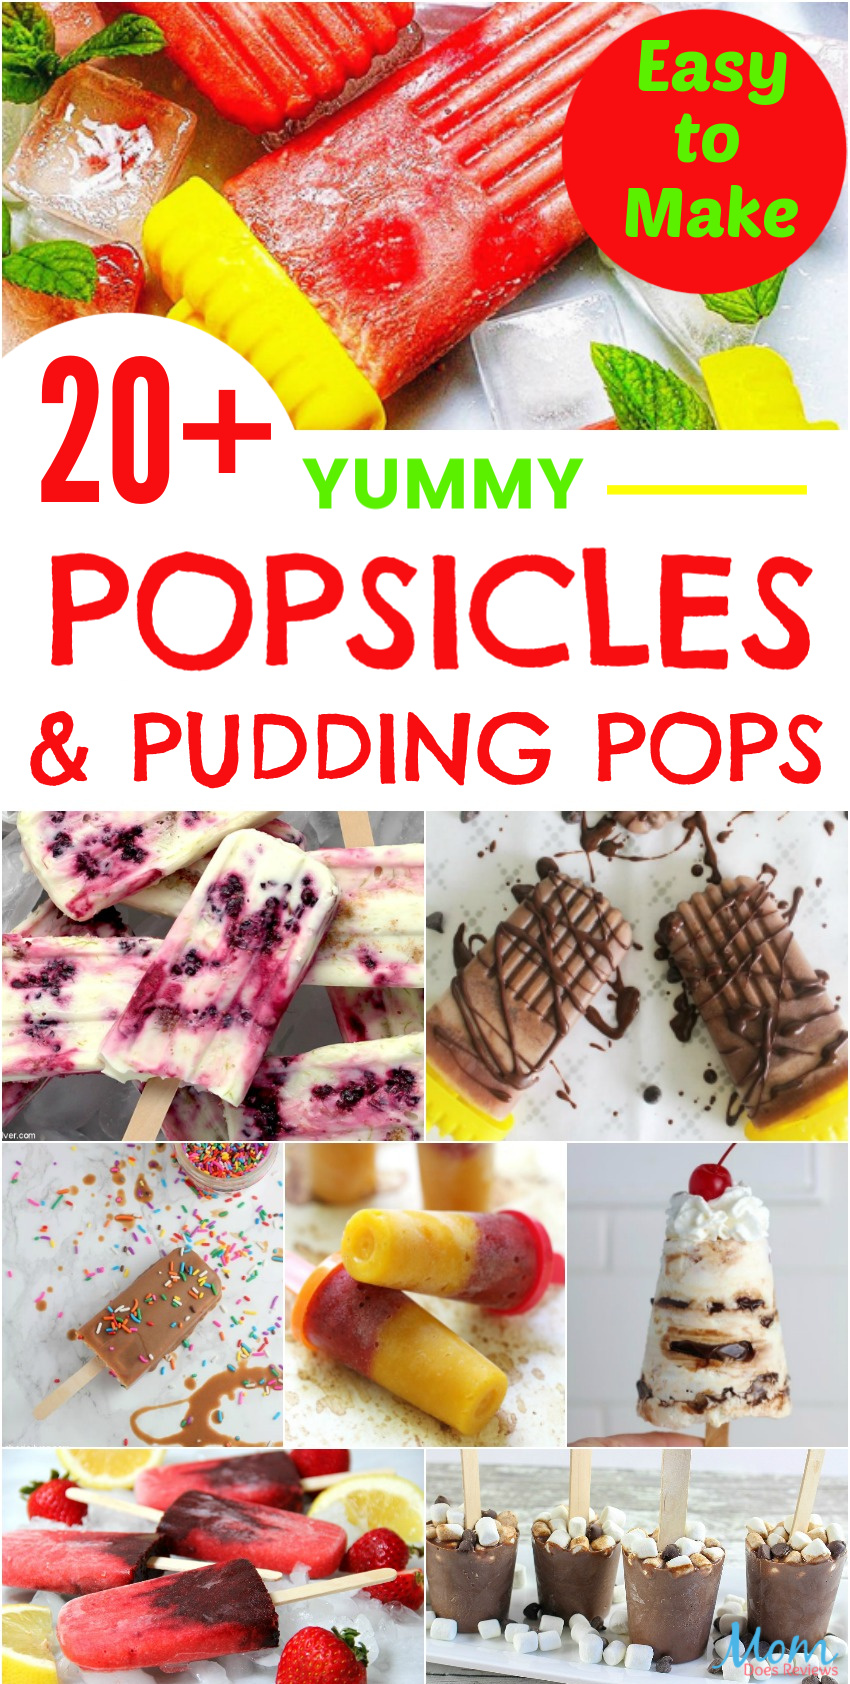 20+ Yummy Easy-to-Make Popsicles & Pudding Pops #recipes #funfood #popsicles